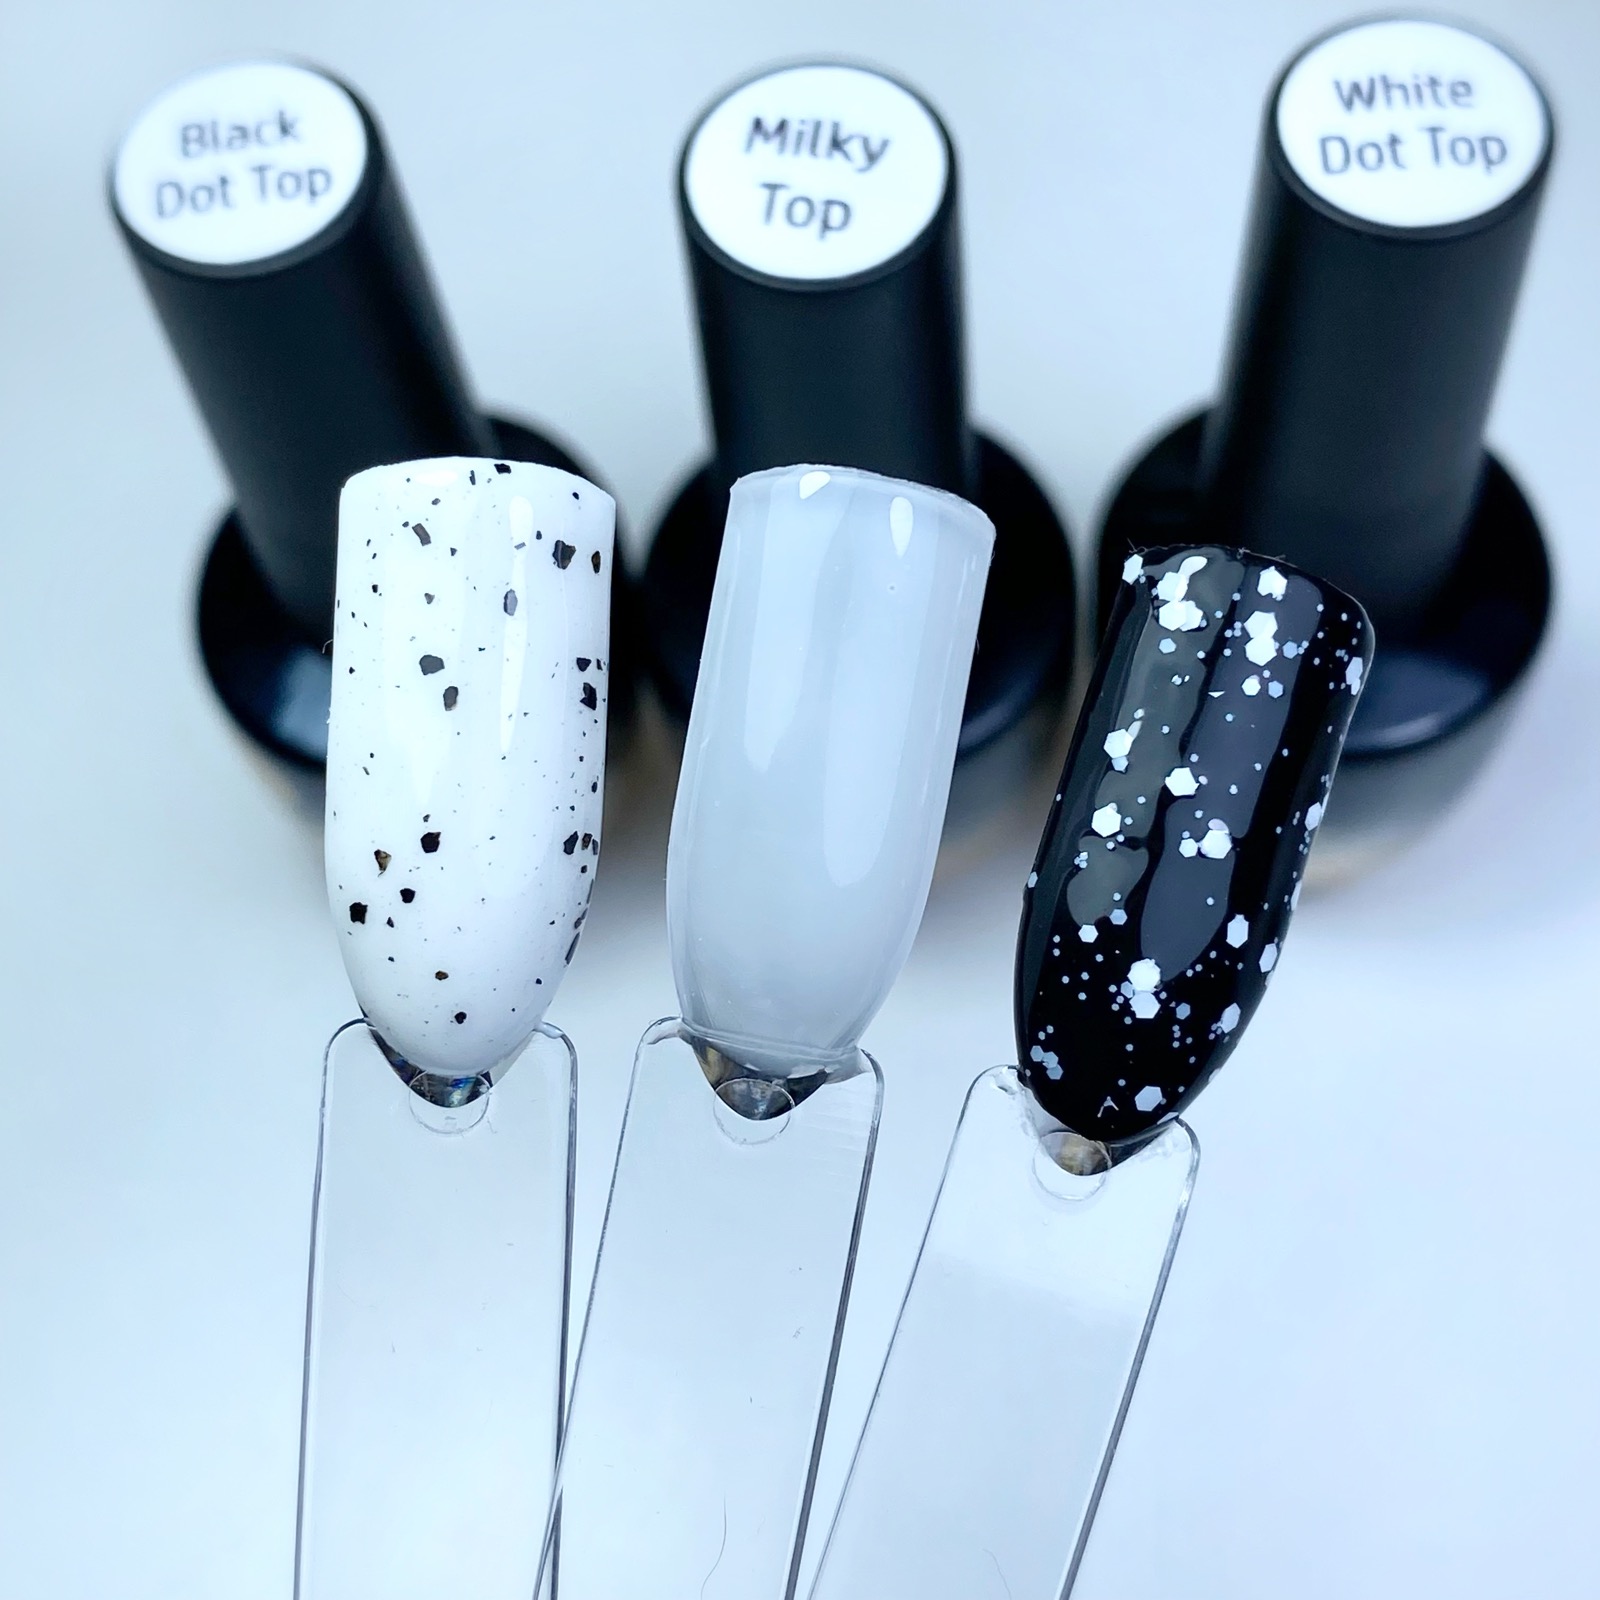 eng_pl_Top-Milky-8ml-no-wipe-855_3